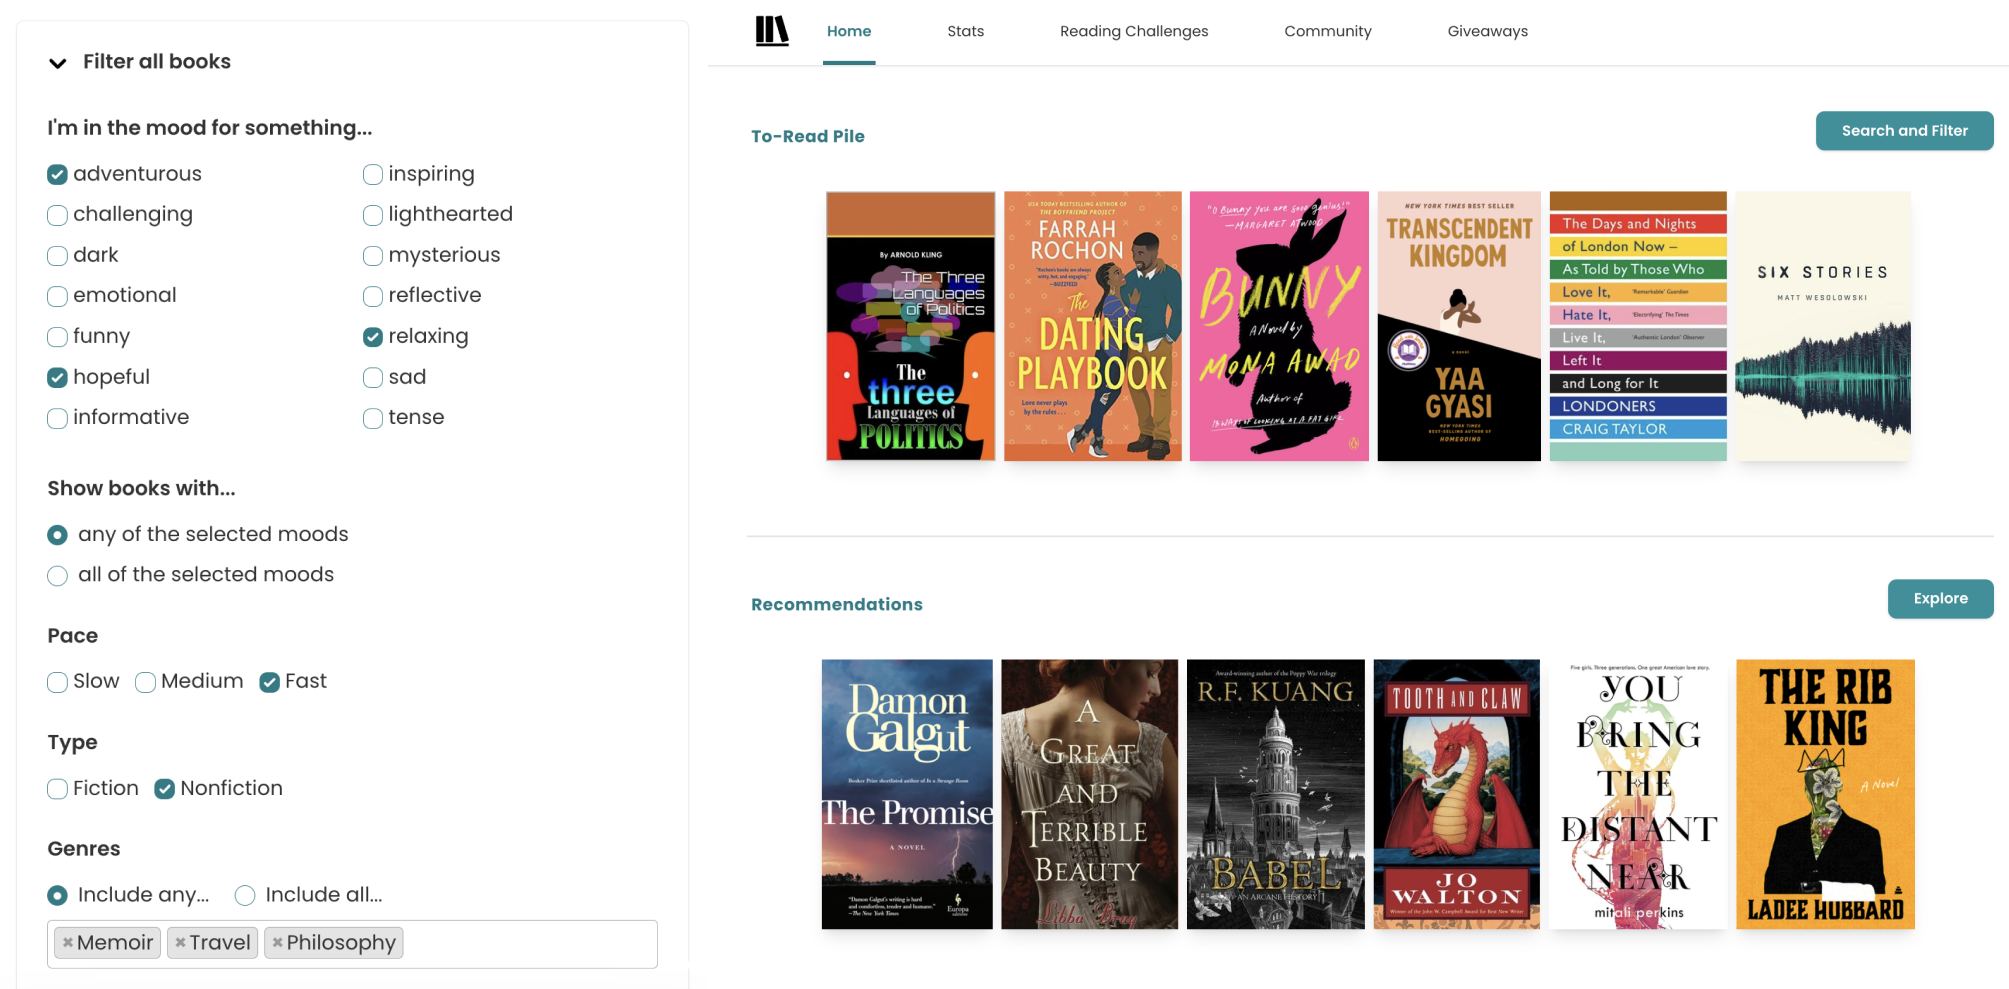 Screenshot of The StoryGraph's homepage with two rows of books covers. The top row is titled 'To-Read Pile' and the bottom row is titled 'Recommendations'. Overlayed, on the left, is the mobile view of a filter menu. There are options to select mood, pace, fiction or nonfiction, and genres.